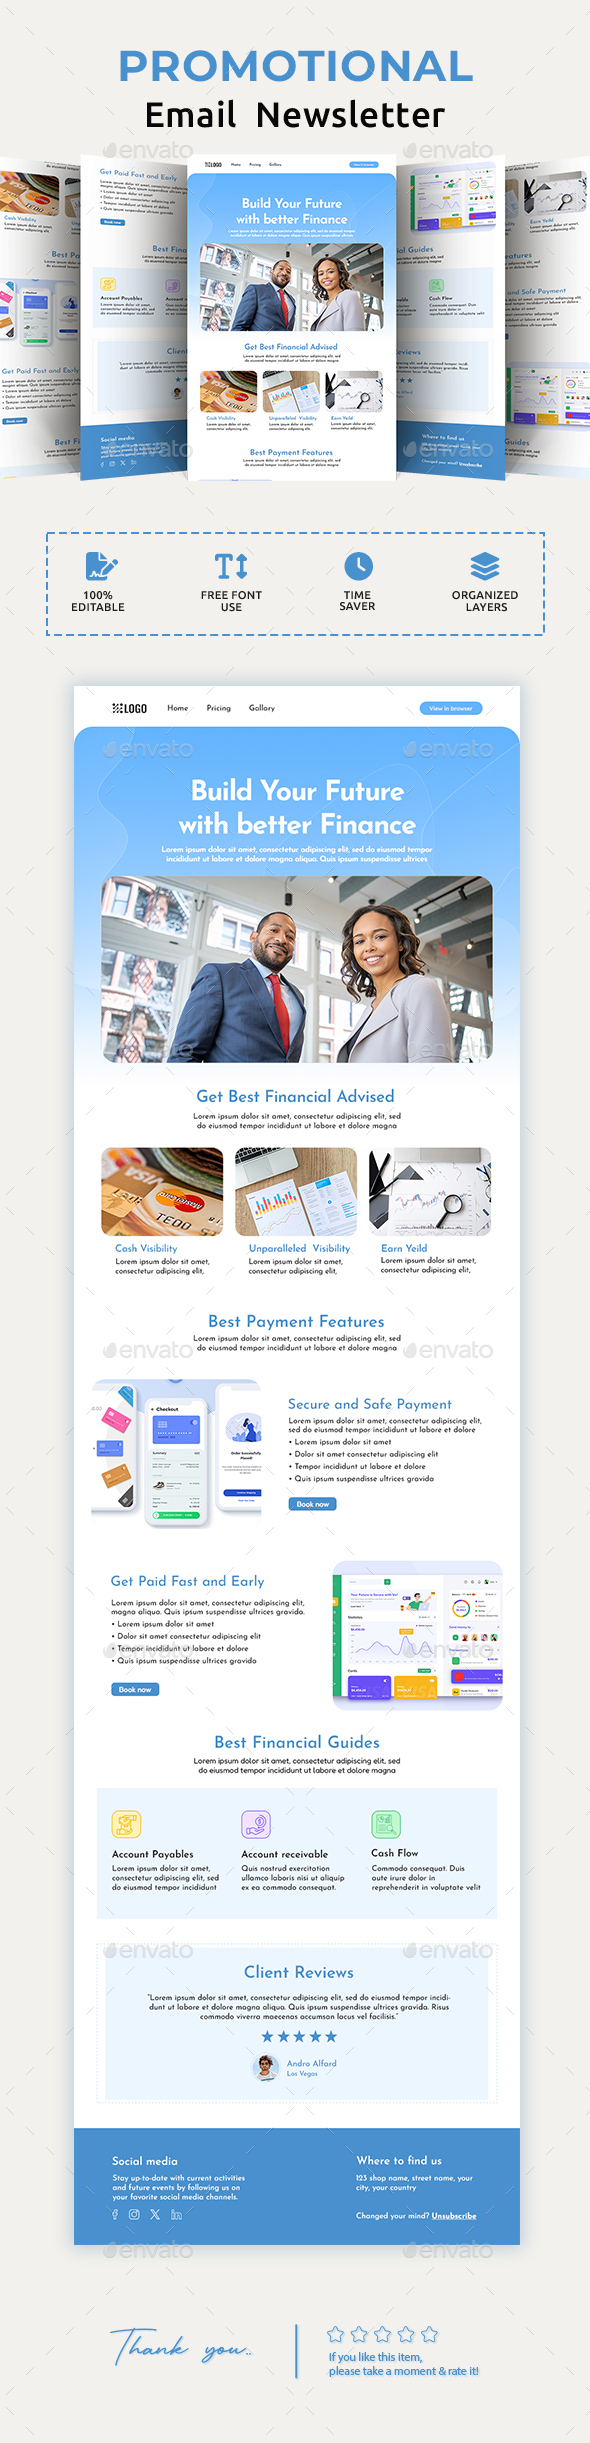 [DOWNLOAD]Finance Email Newsletter PSD Template